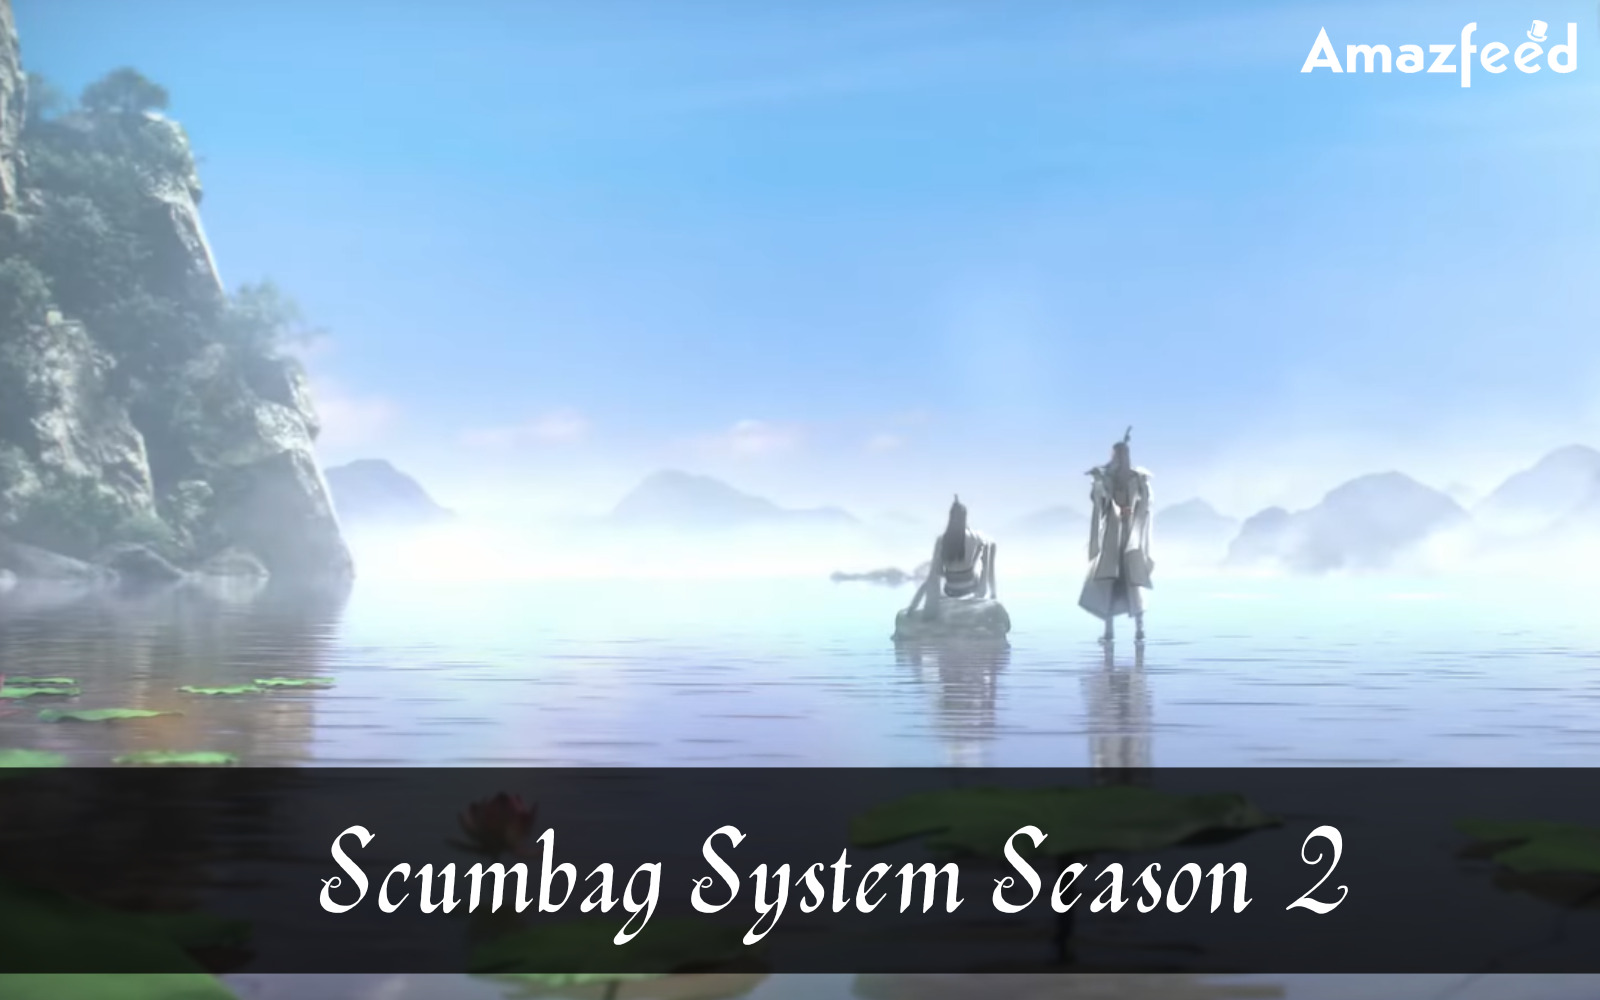 How many Episodes of Scumbag System Season 2 will be there